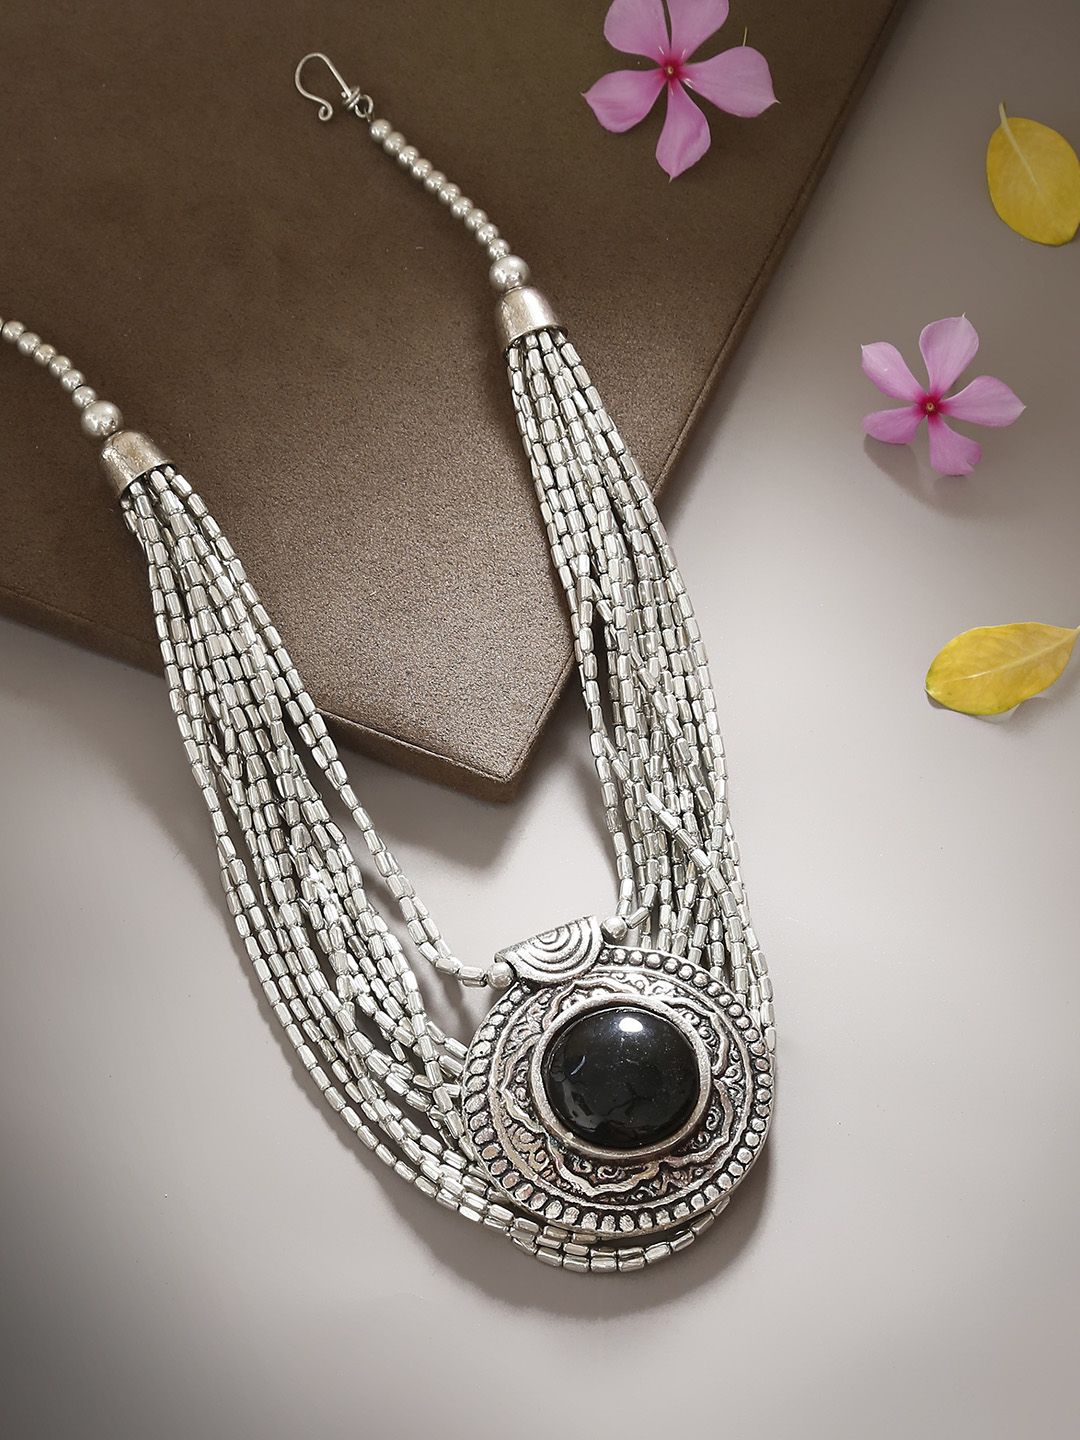 Bamboo Tree Jewels Oxidized Black & Silver-Toned Handcrafted Necklace Price in India